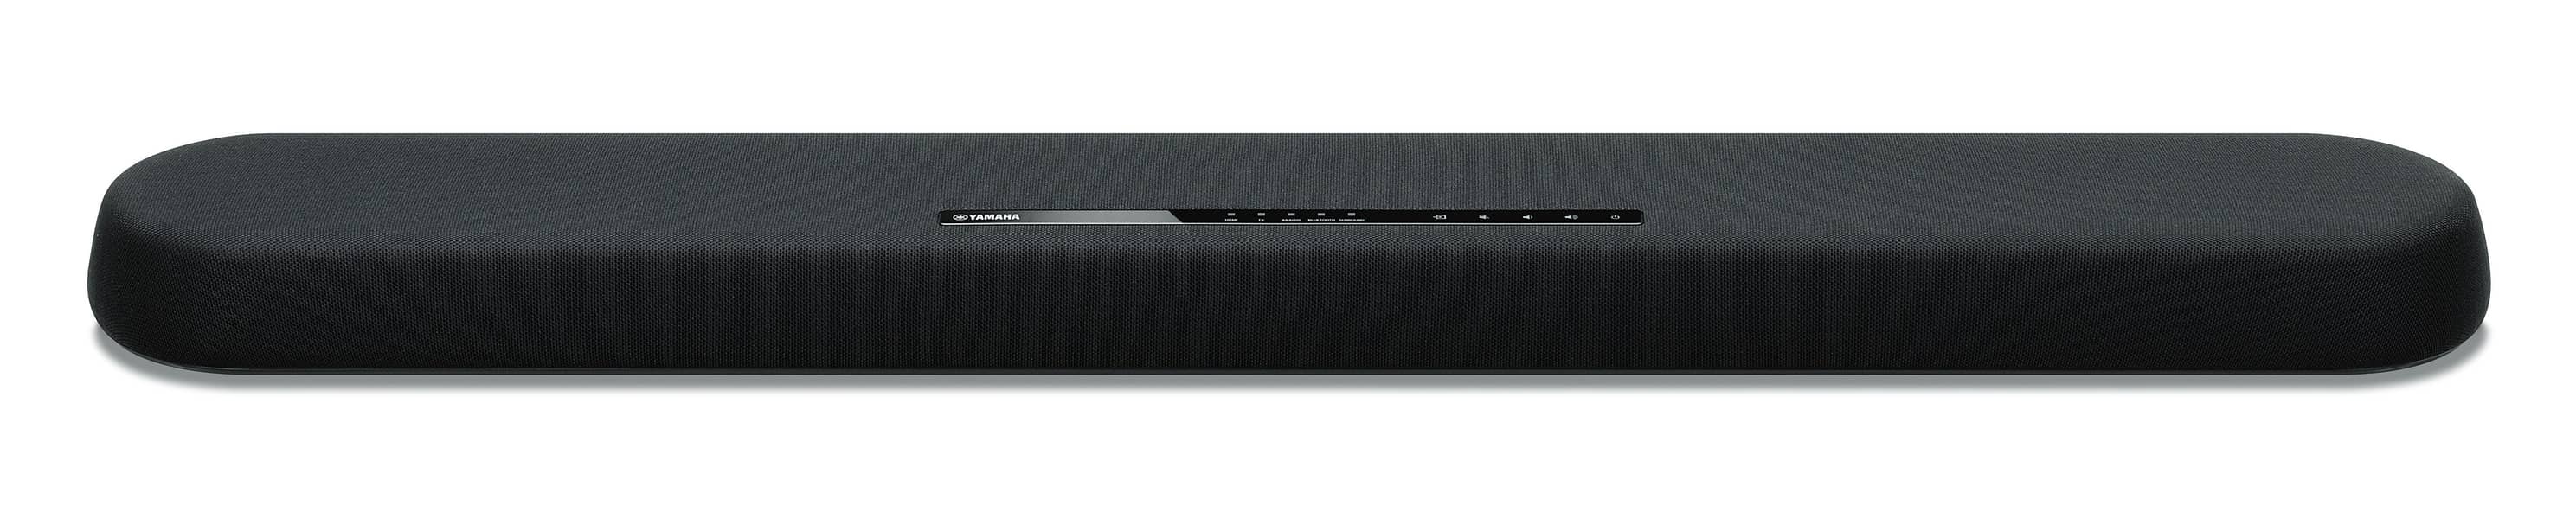 Orignal Yamaha ATS-1080 Sound bar with Built-in Subwoofers With remote 3